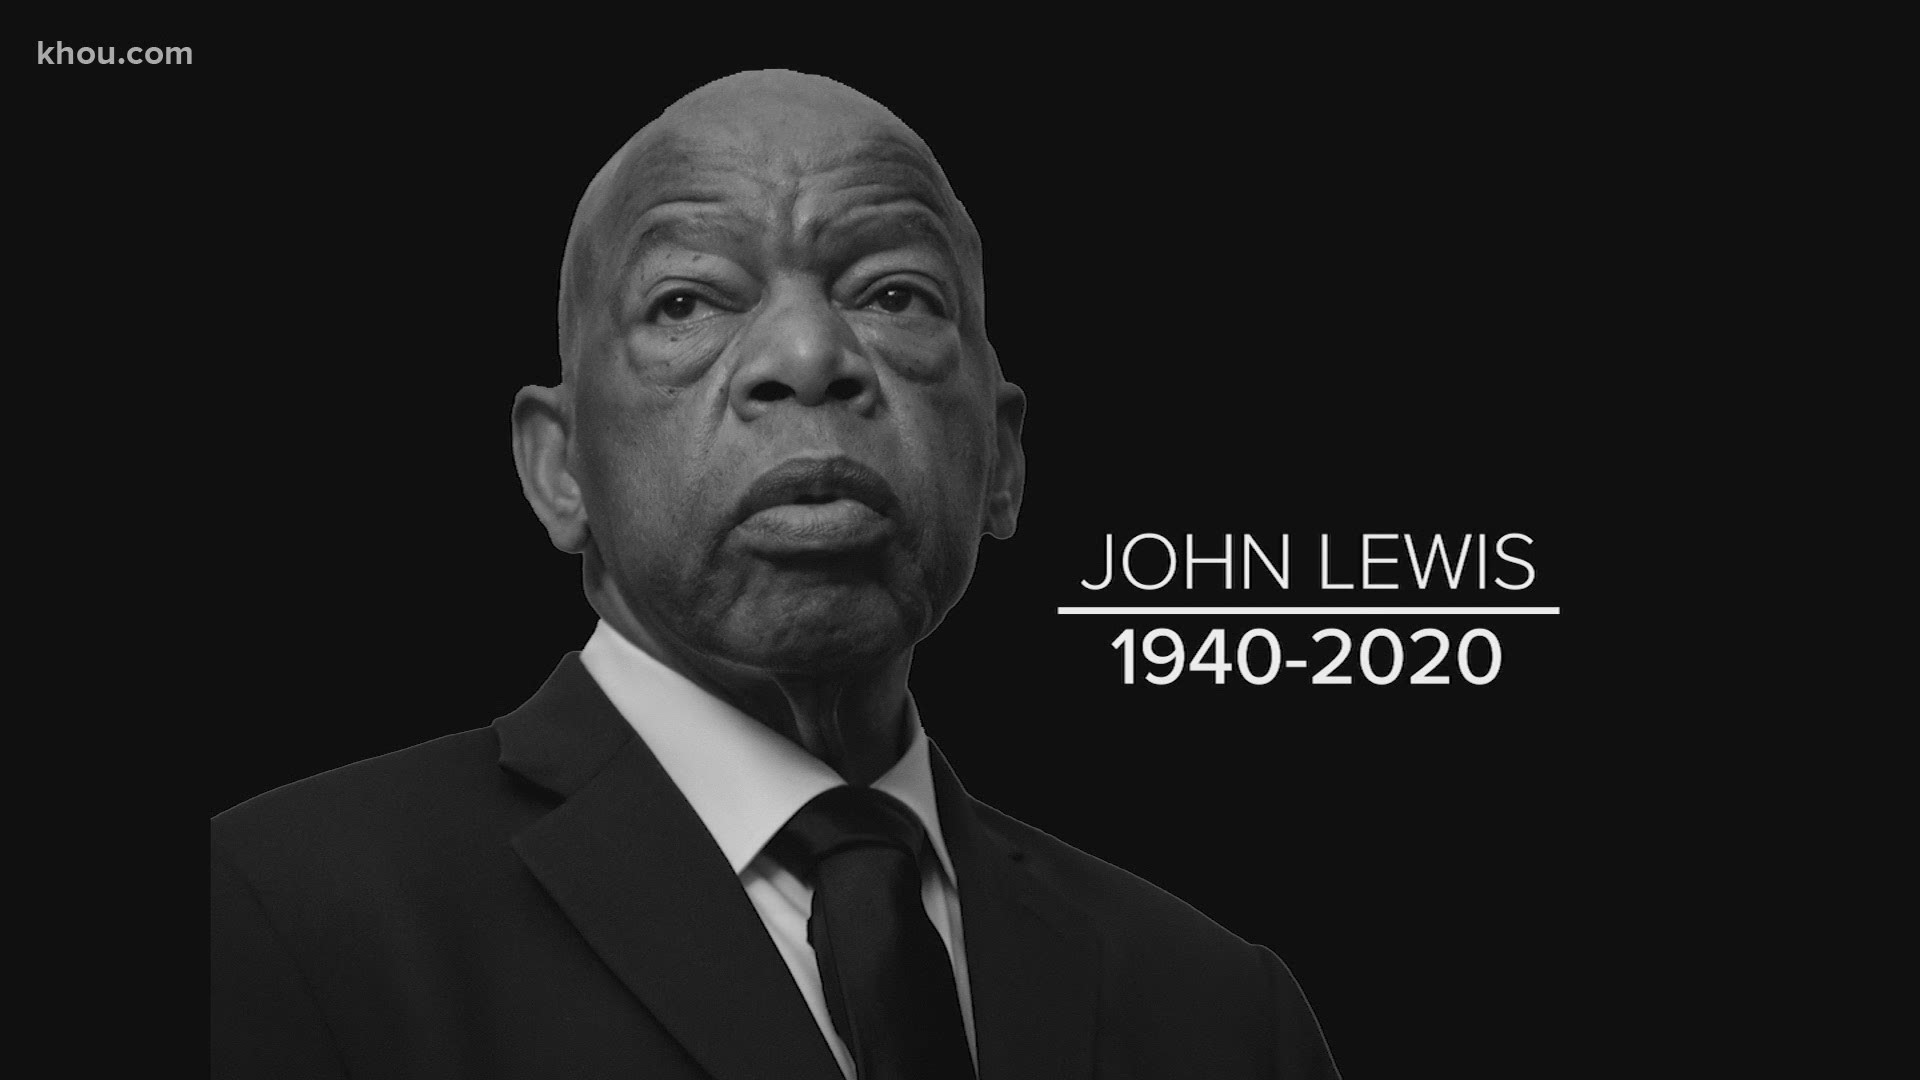 Houston leaders mourn the death of John Lewis, a longtime U.S. congressman and civil rights activist, who will be remembered as a 'strong warrior' of justice.